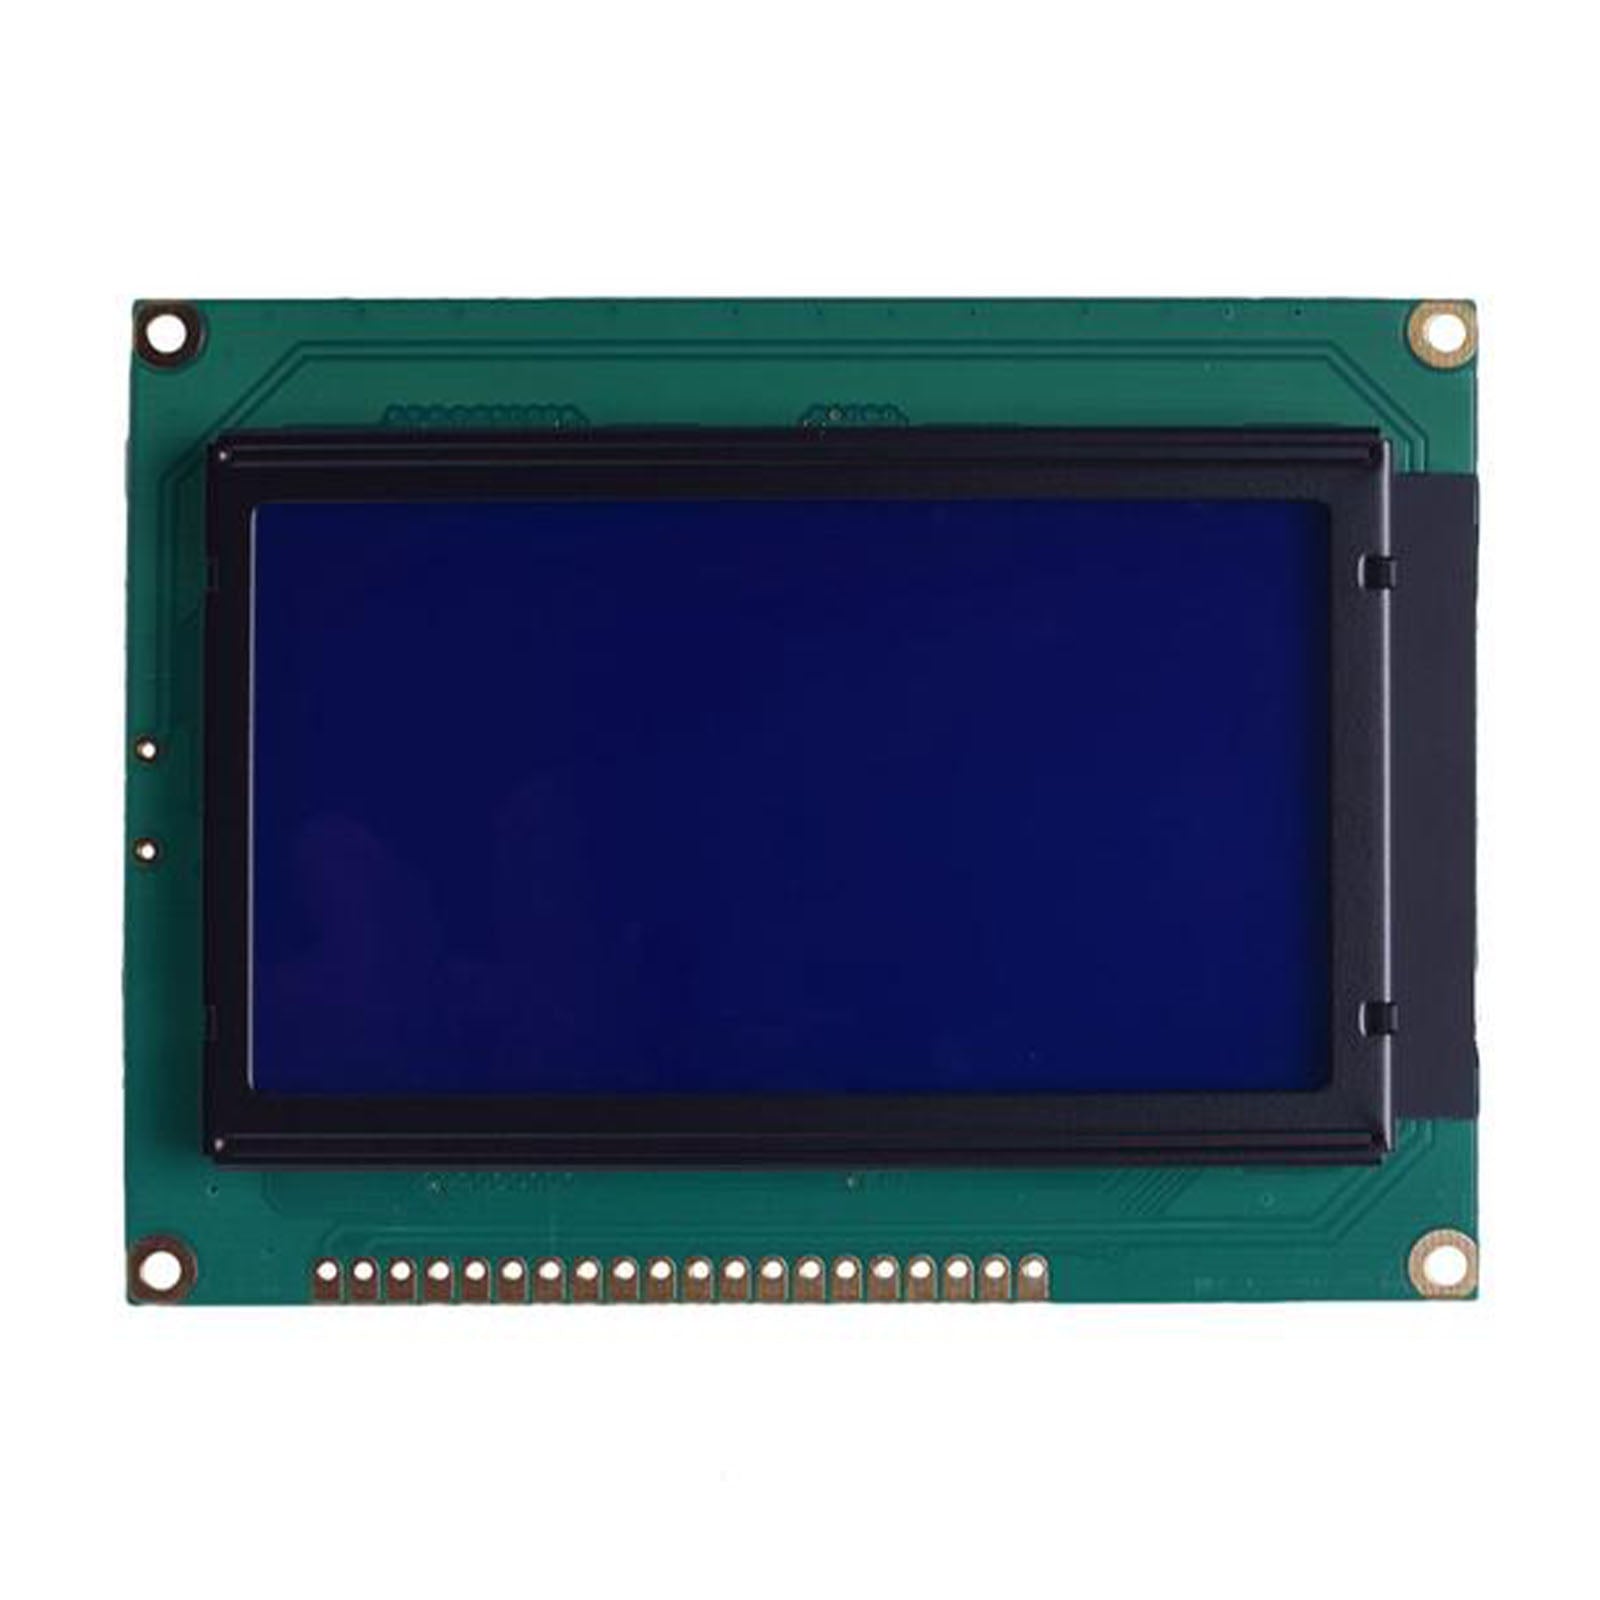 Large 128x64 LCD 3.24 inch graphic blue display module with MCU interface